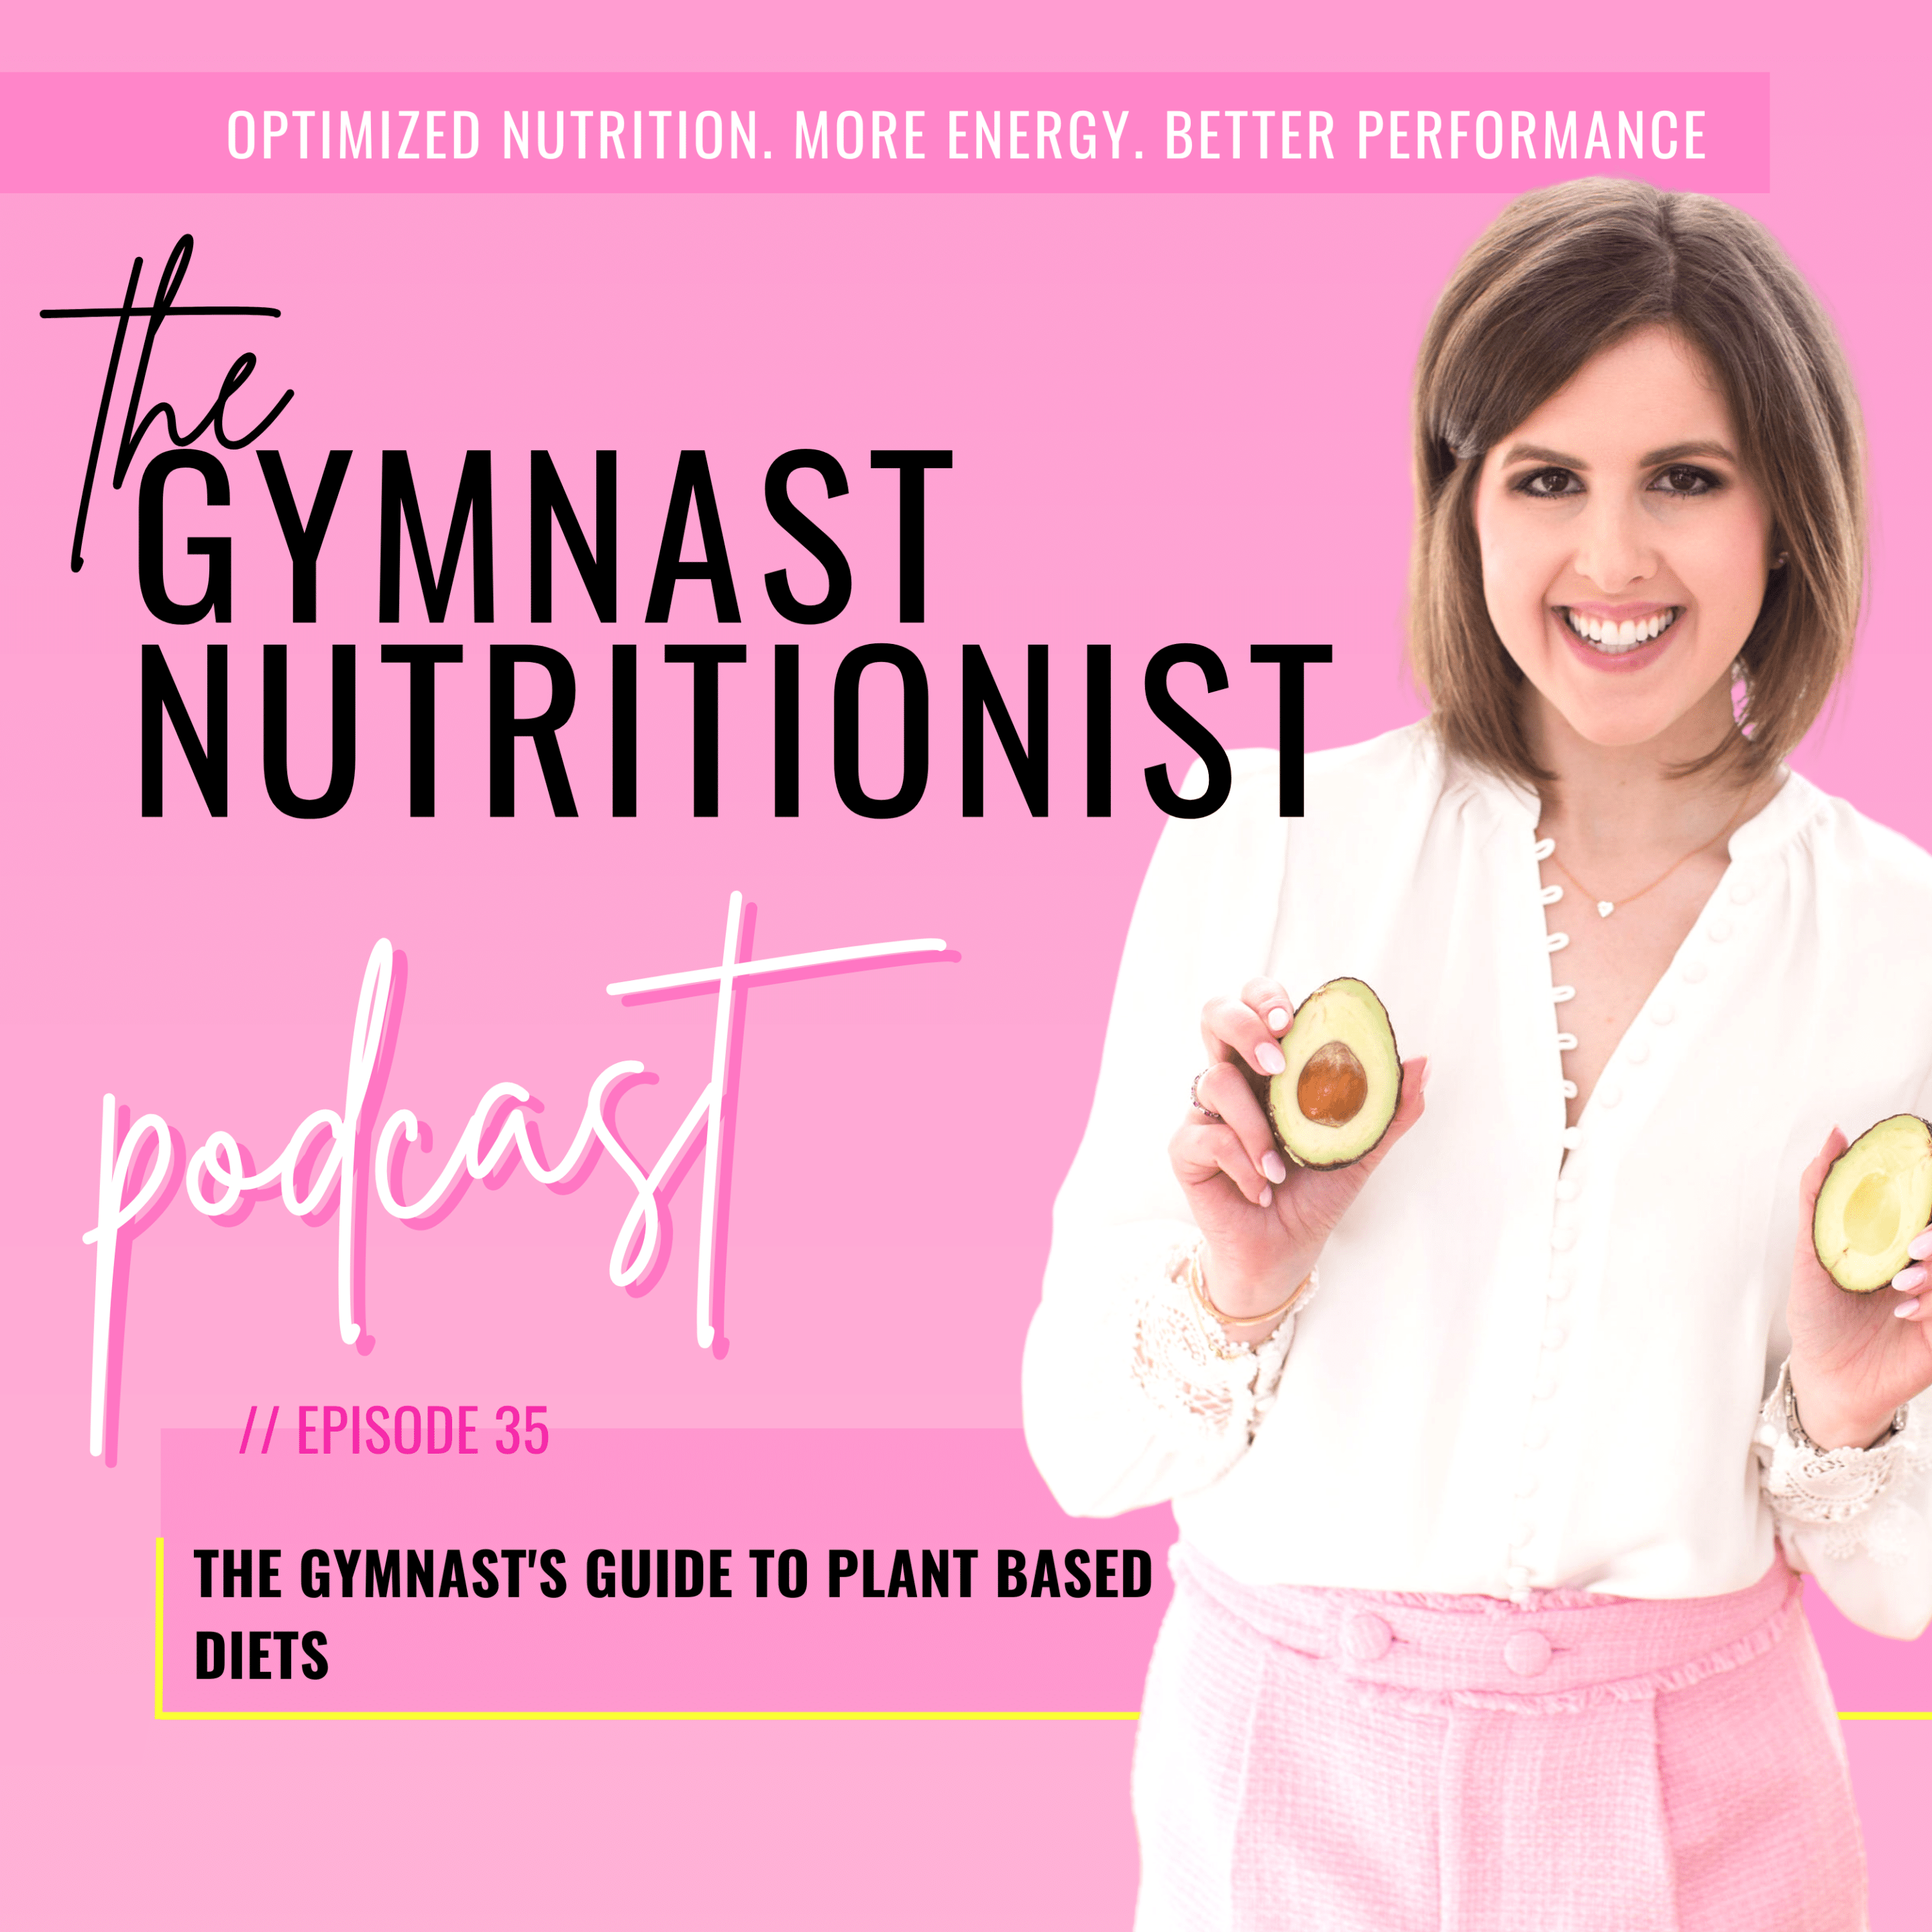 Episode 35: The Gymnast's Guide to Plant Based Diets